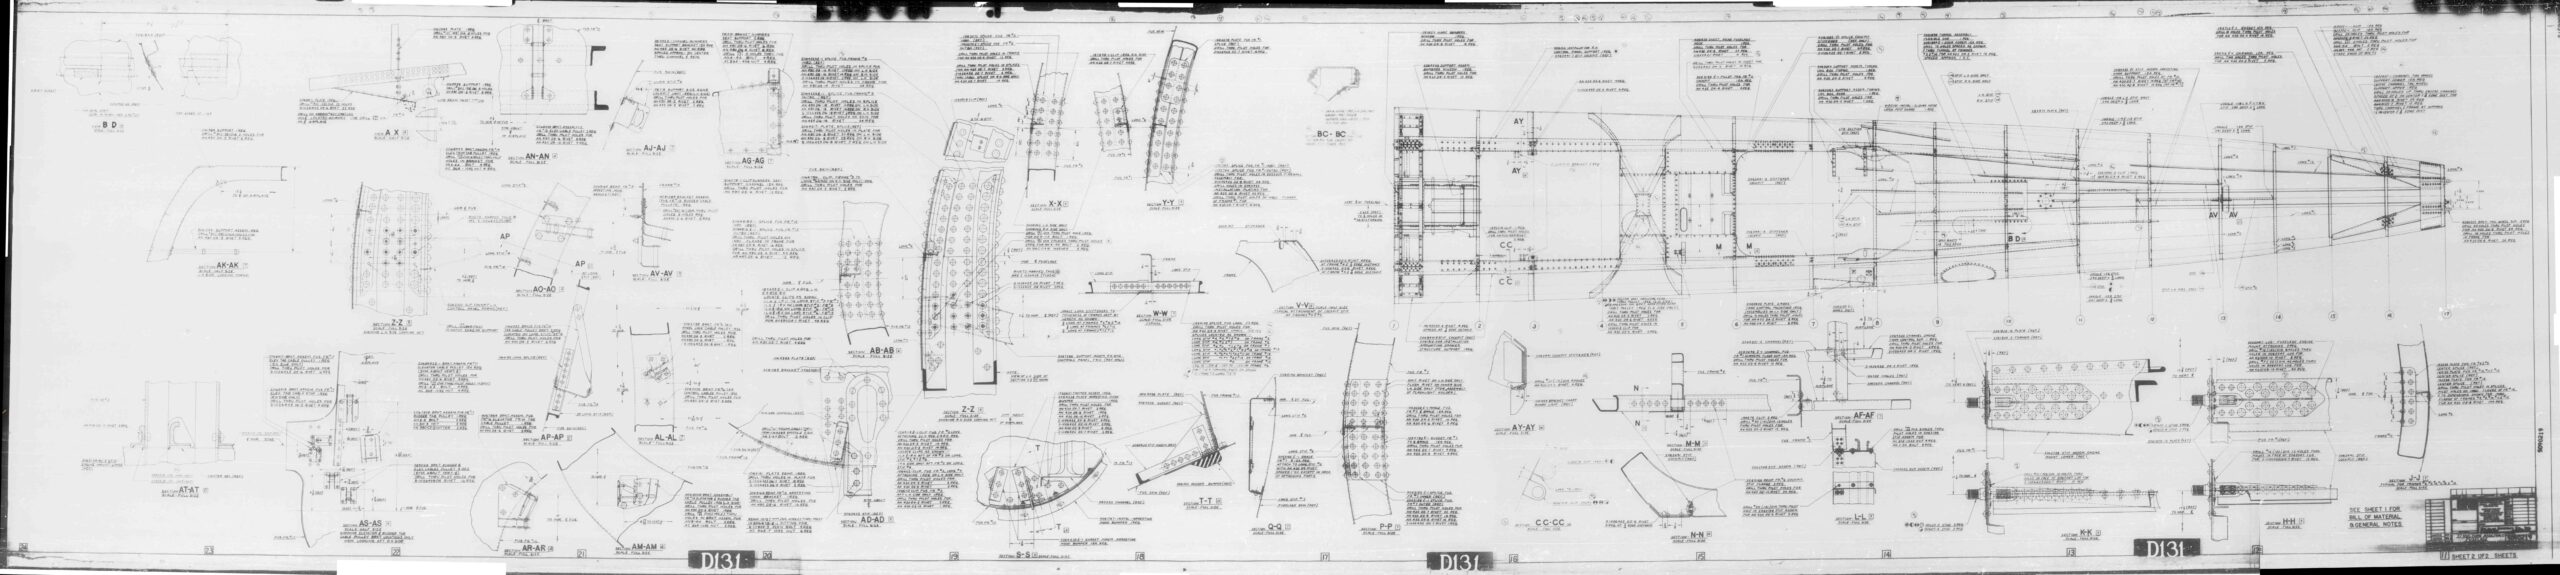 Sbd Fuselage Drawing 2 Small